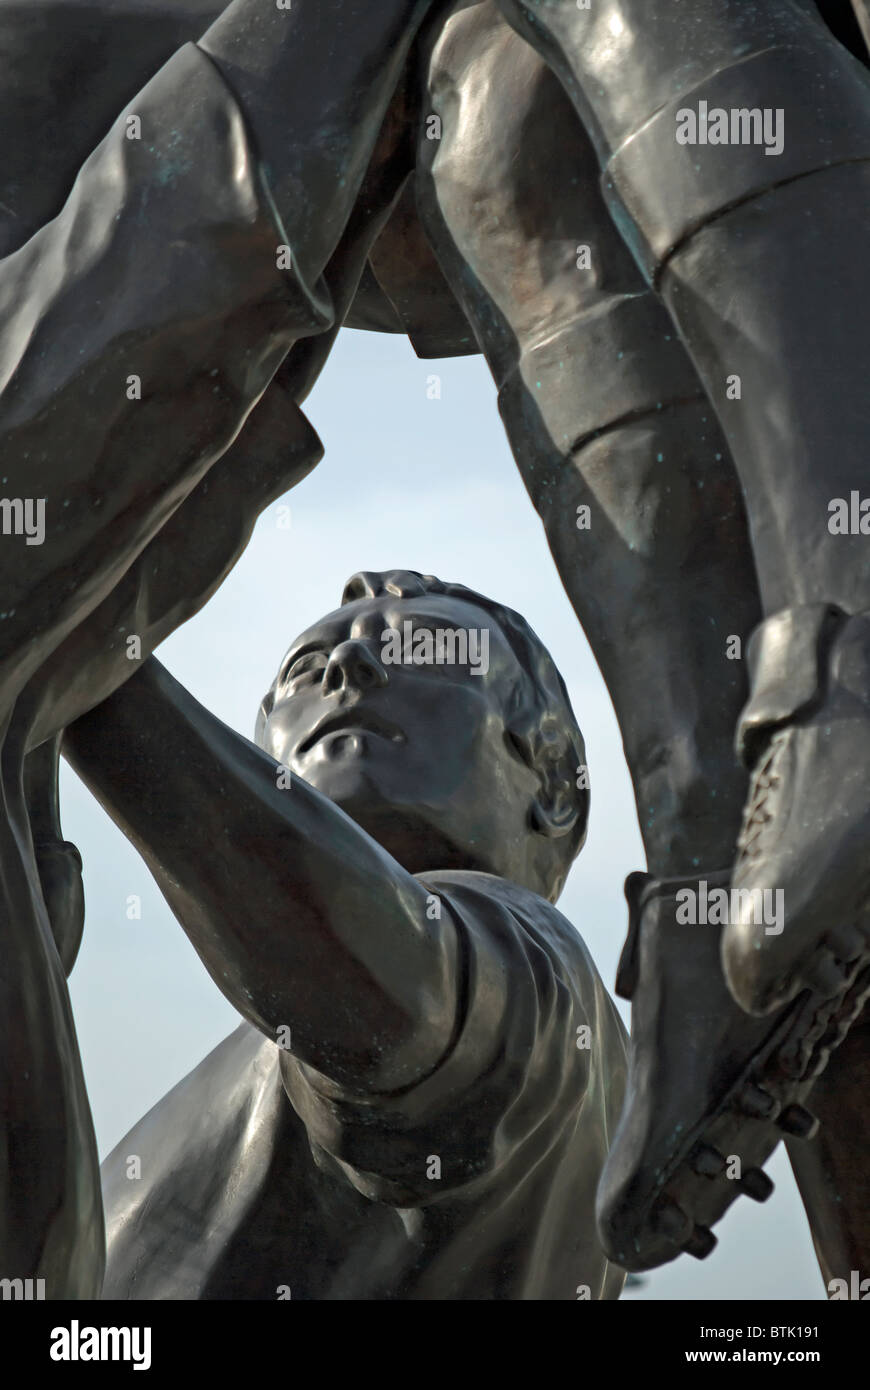 detail of gerald laing's bronze sculpture depicting a rugby lineout, outside twickenham stadium, twickenham, middlesex, england Stock Photo